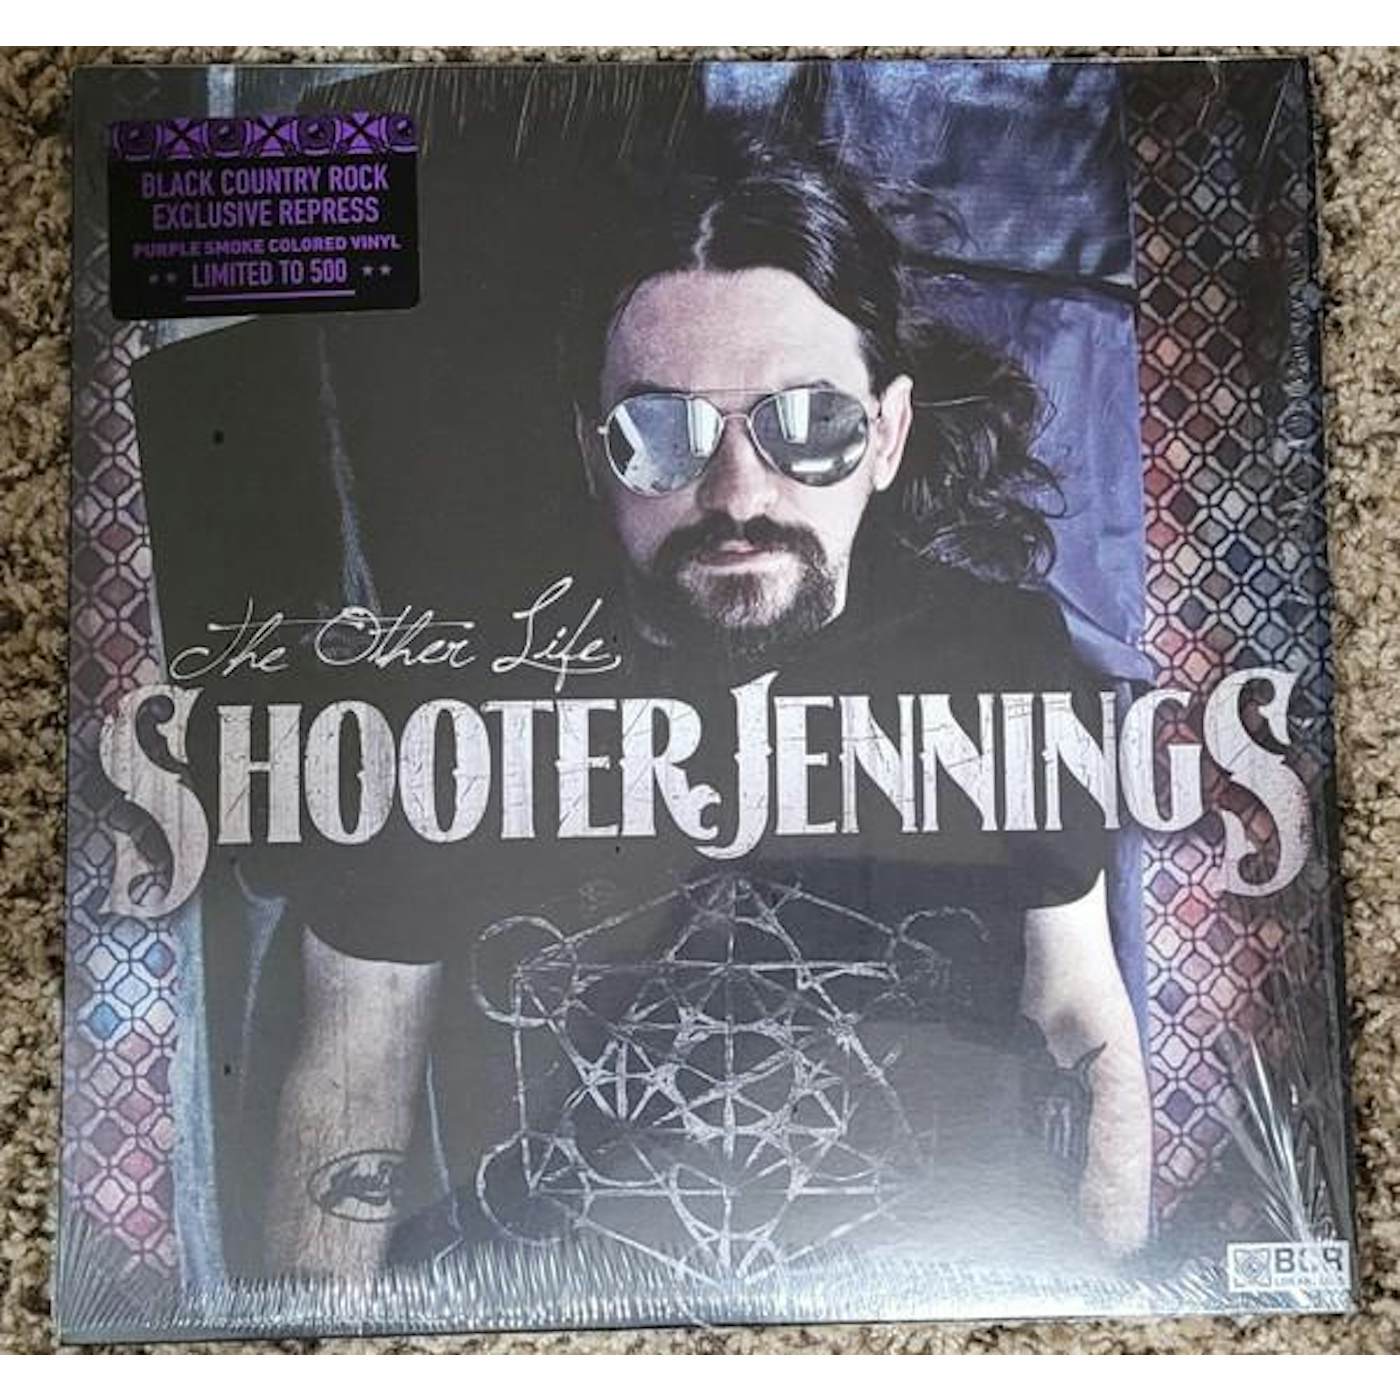 Shooter Jennings OTHER LIFE (LIMITED EDITION PURPLE SMOKE COLORED VINYL) Vinyl Record